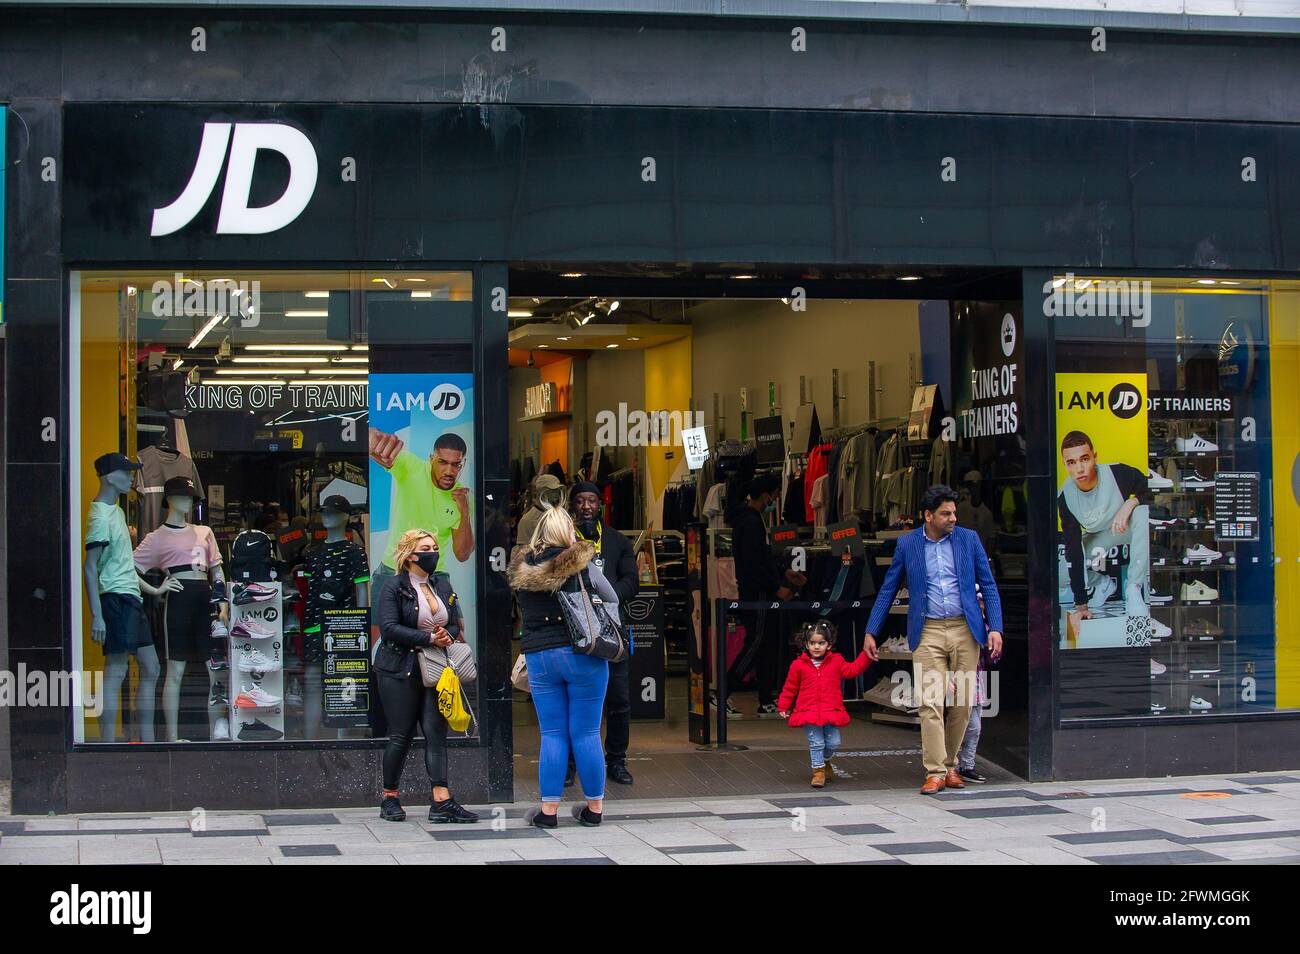 Slough, Berkshire, UK. 23rd May, 2021. Shoppers out in Slough High Street today outside the JD store. The Covid-19 seven day rolling infection rates per 100,000 people in Slough for the week ending May 18 has risen to 25.4, up from 22.7. Given that the number of positive Covid-19 Indian variant cases are starting to rise, the possibly of the entire lifting of lockdown restrictions in June may now be in jeopardy. Credit: Maureen McLean/Alamy Live News Stock Photo